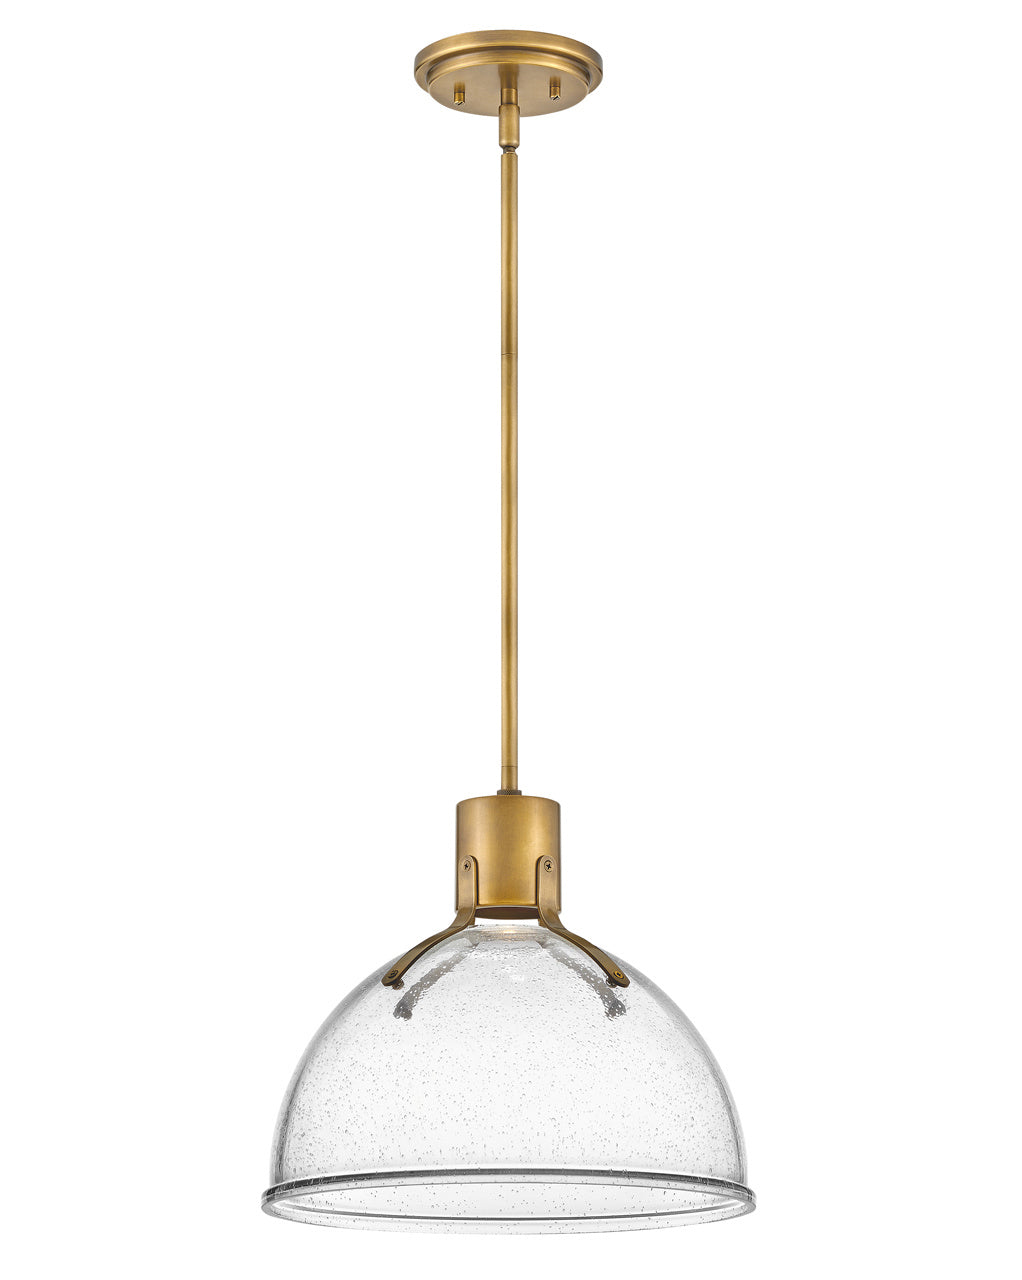 Hinkley Canada - LED Pendant - Argo - Heritage Brass with Clear Seedy glass- Union Lighting Luminaires Decor